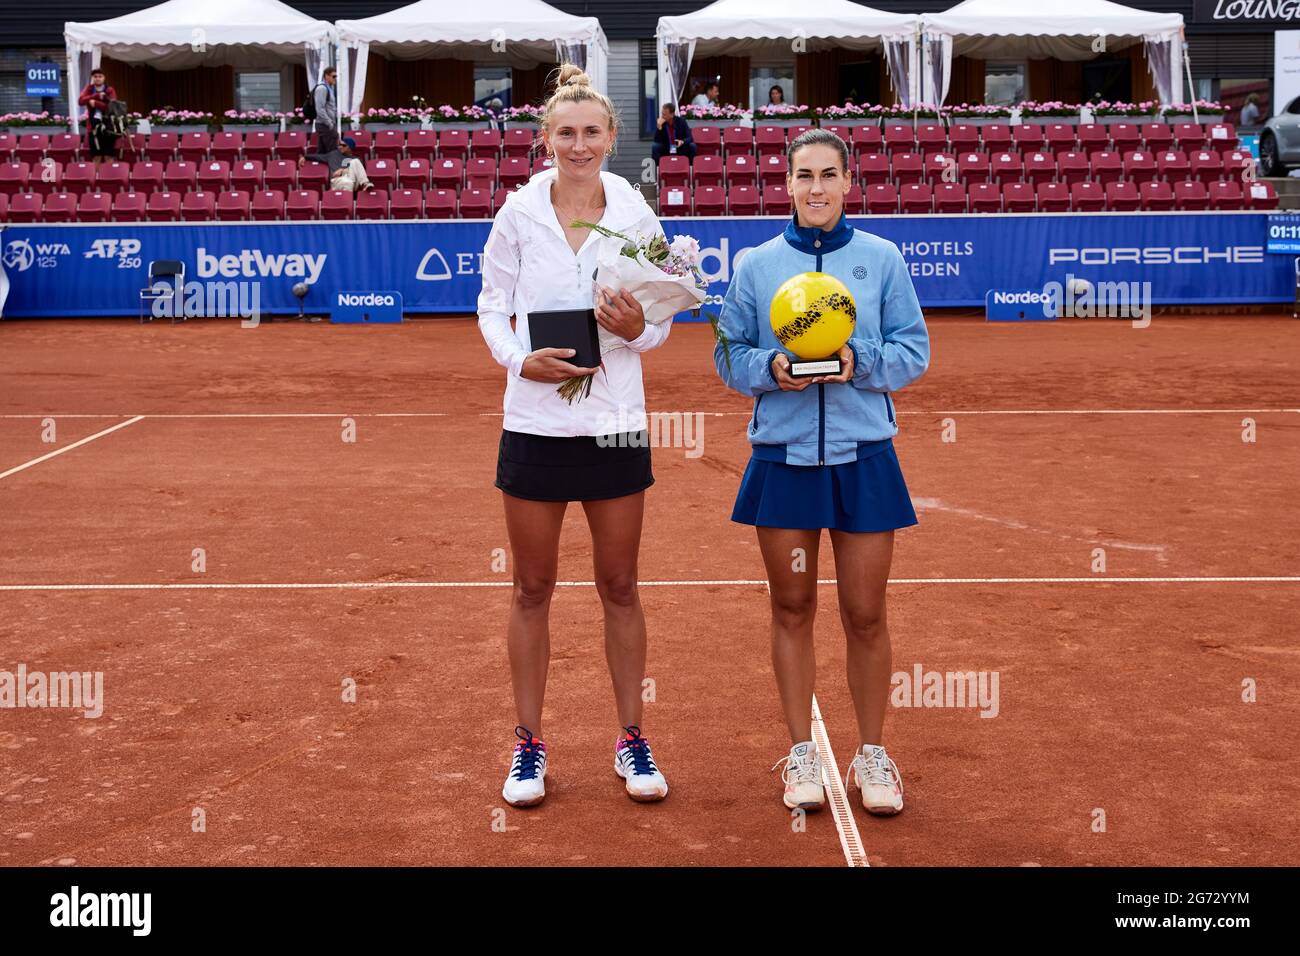 Olga Govortsova, Belarus and winner Nuria Parrizas Diaz, Spain after the  final during the tennis tournament Nordea Open in Bastad, Sweden July 10,  2021. Photo: Anders Bjuro / TT ** SWEDEN OUT ** Stock Photo - Alamy